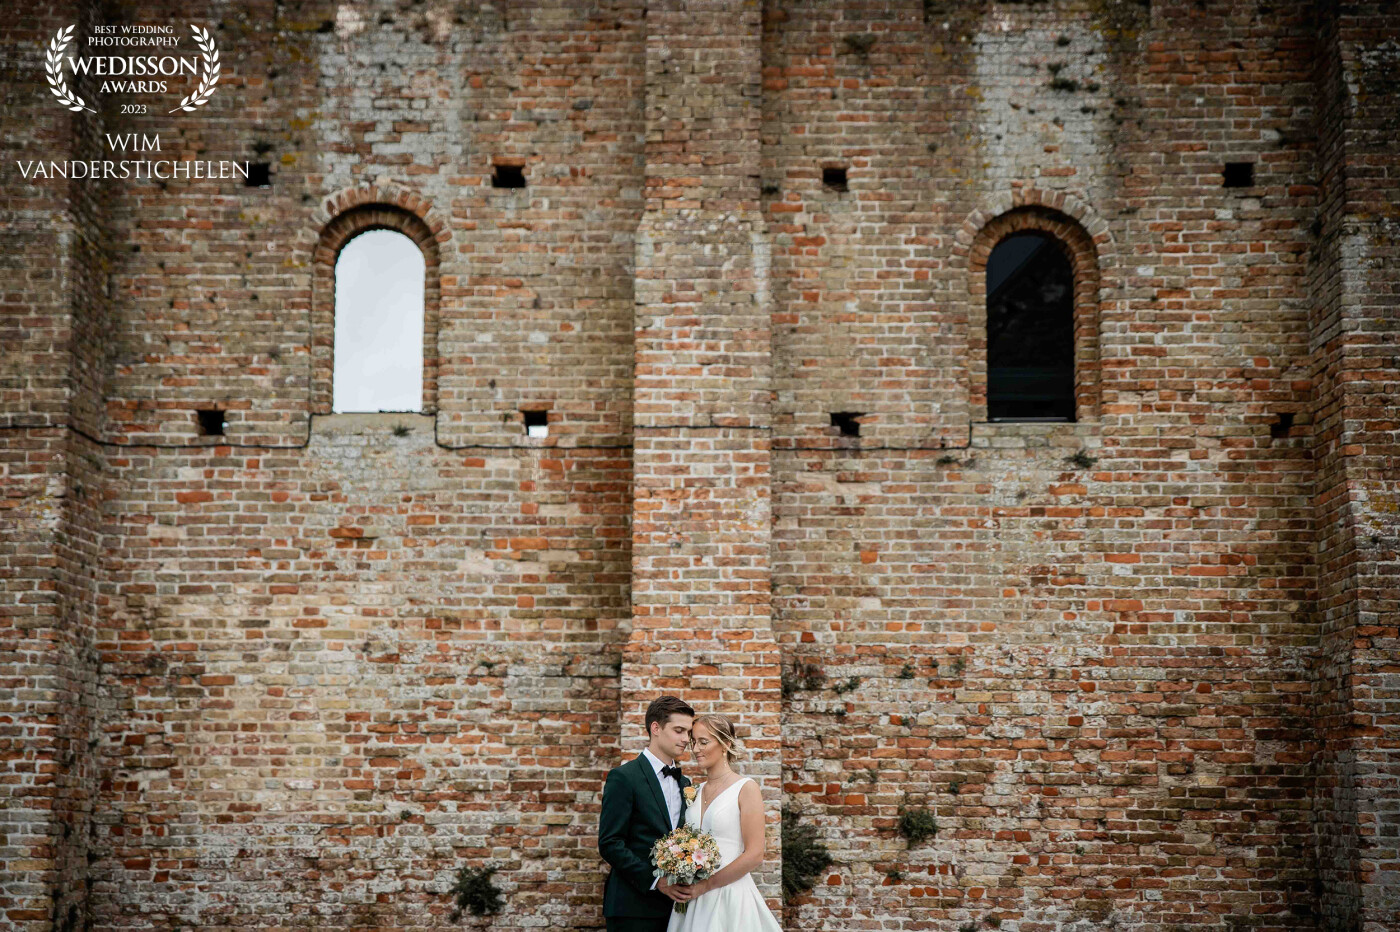 This photo was shot at an old abbey in Koksijde (Belgium) who is now a museum. I just love the old brick wall!<br />
The couple was enjoying a tender moment just after they got married.